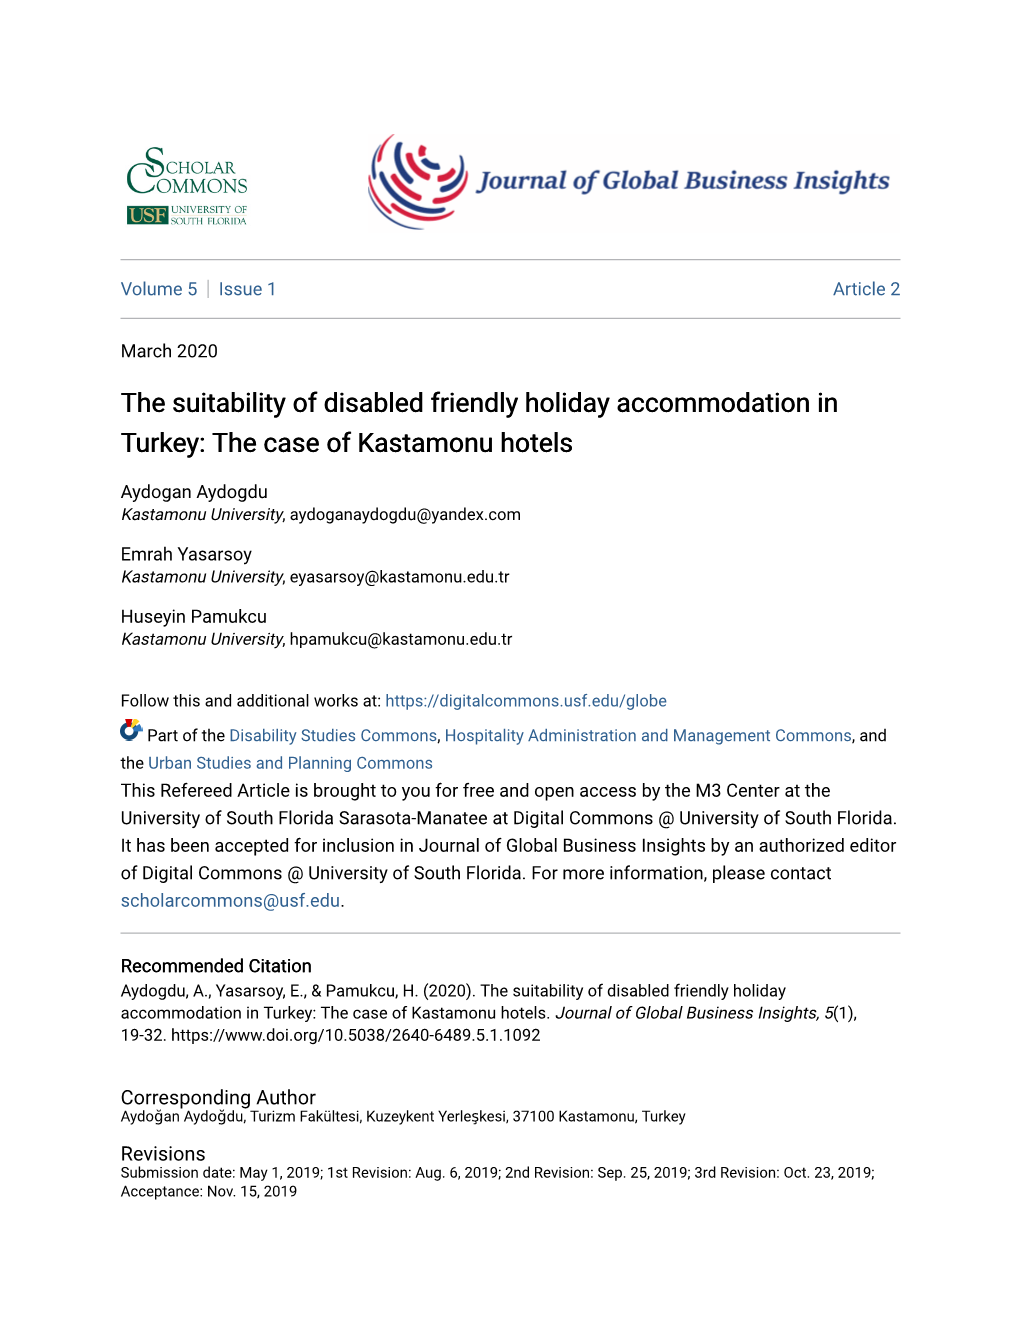 The Suitability of Disabled Friendly Holiday Accommodation in Turkey: the Case of Kastamonu Hotels